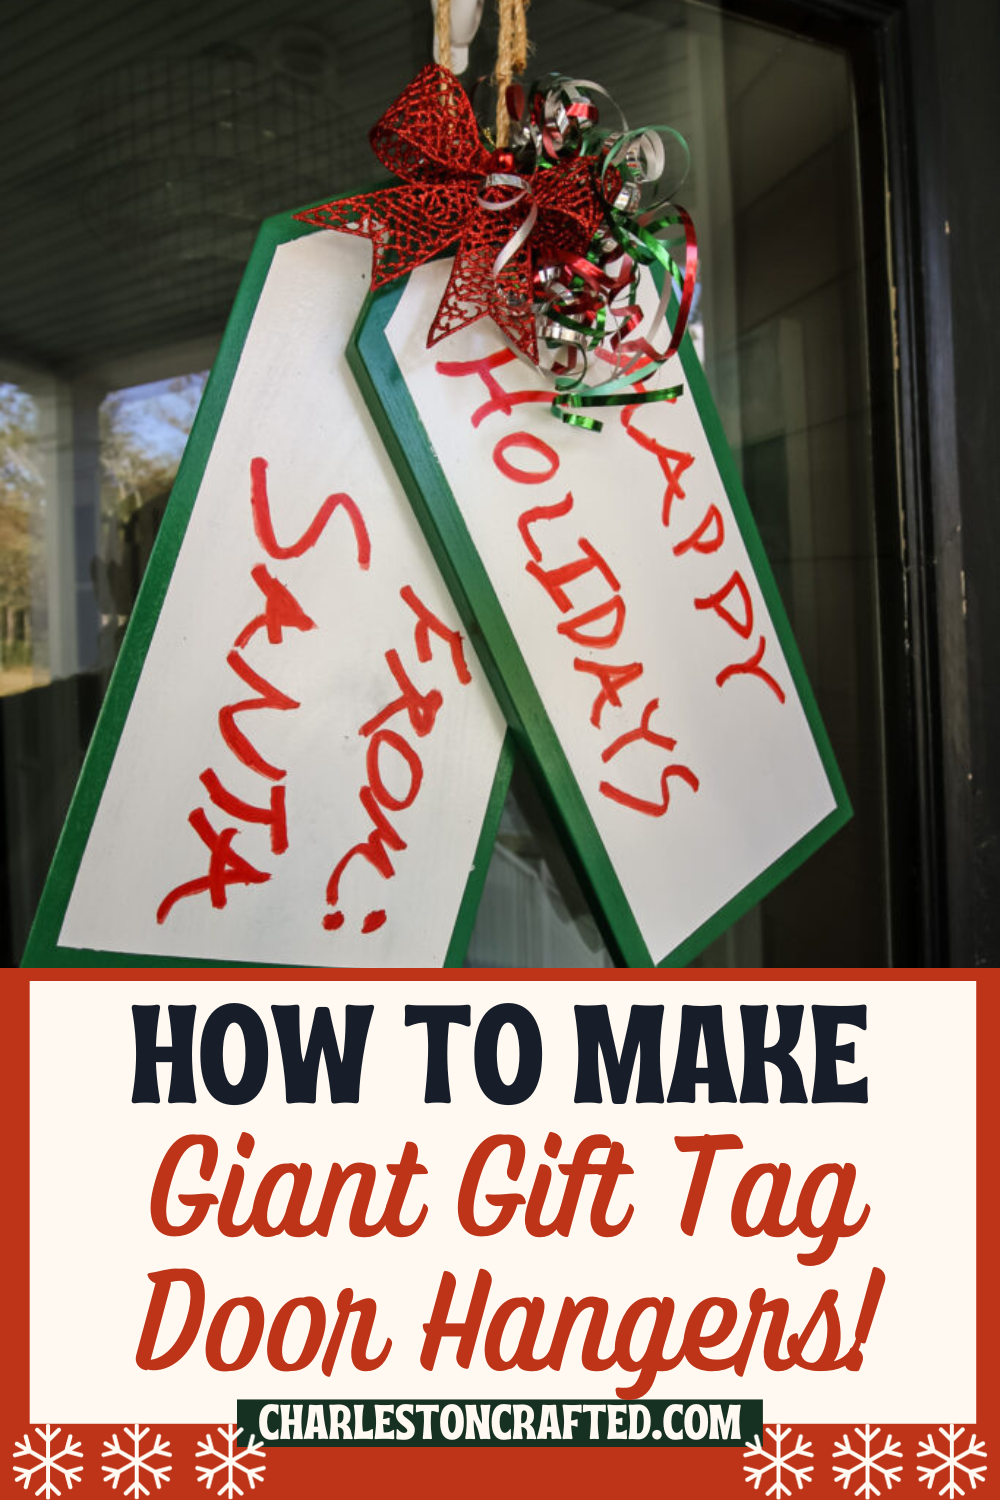 How to make giant gift tag door hanger - Charleston Crafted